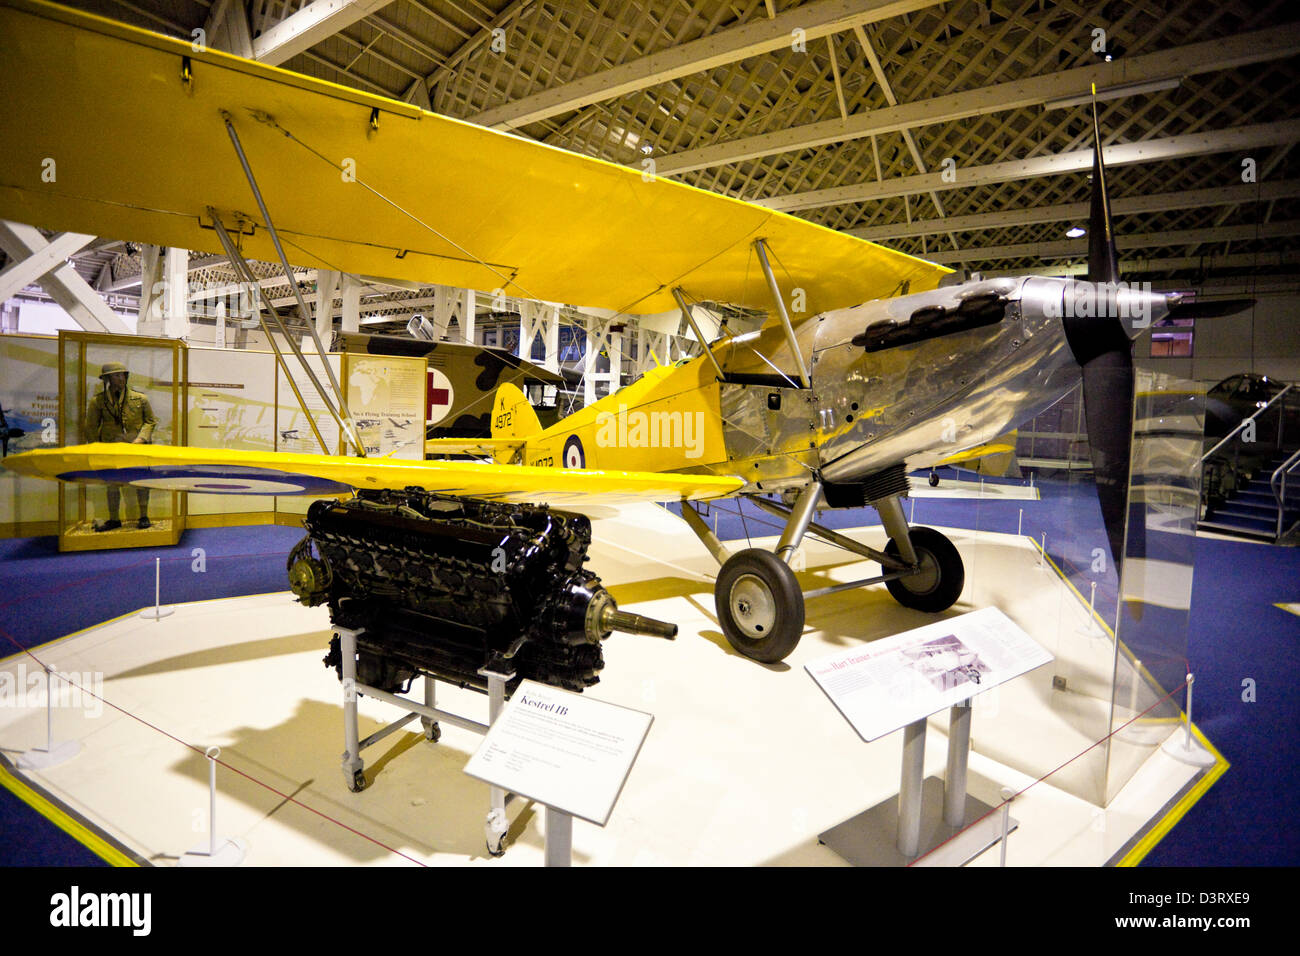 The Hawker Hart, British two-seater biplane light bomber, on display at the Royal Air Force (RAF) Museum, London, England, UK Stock Photo